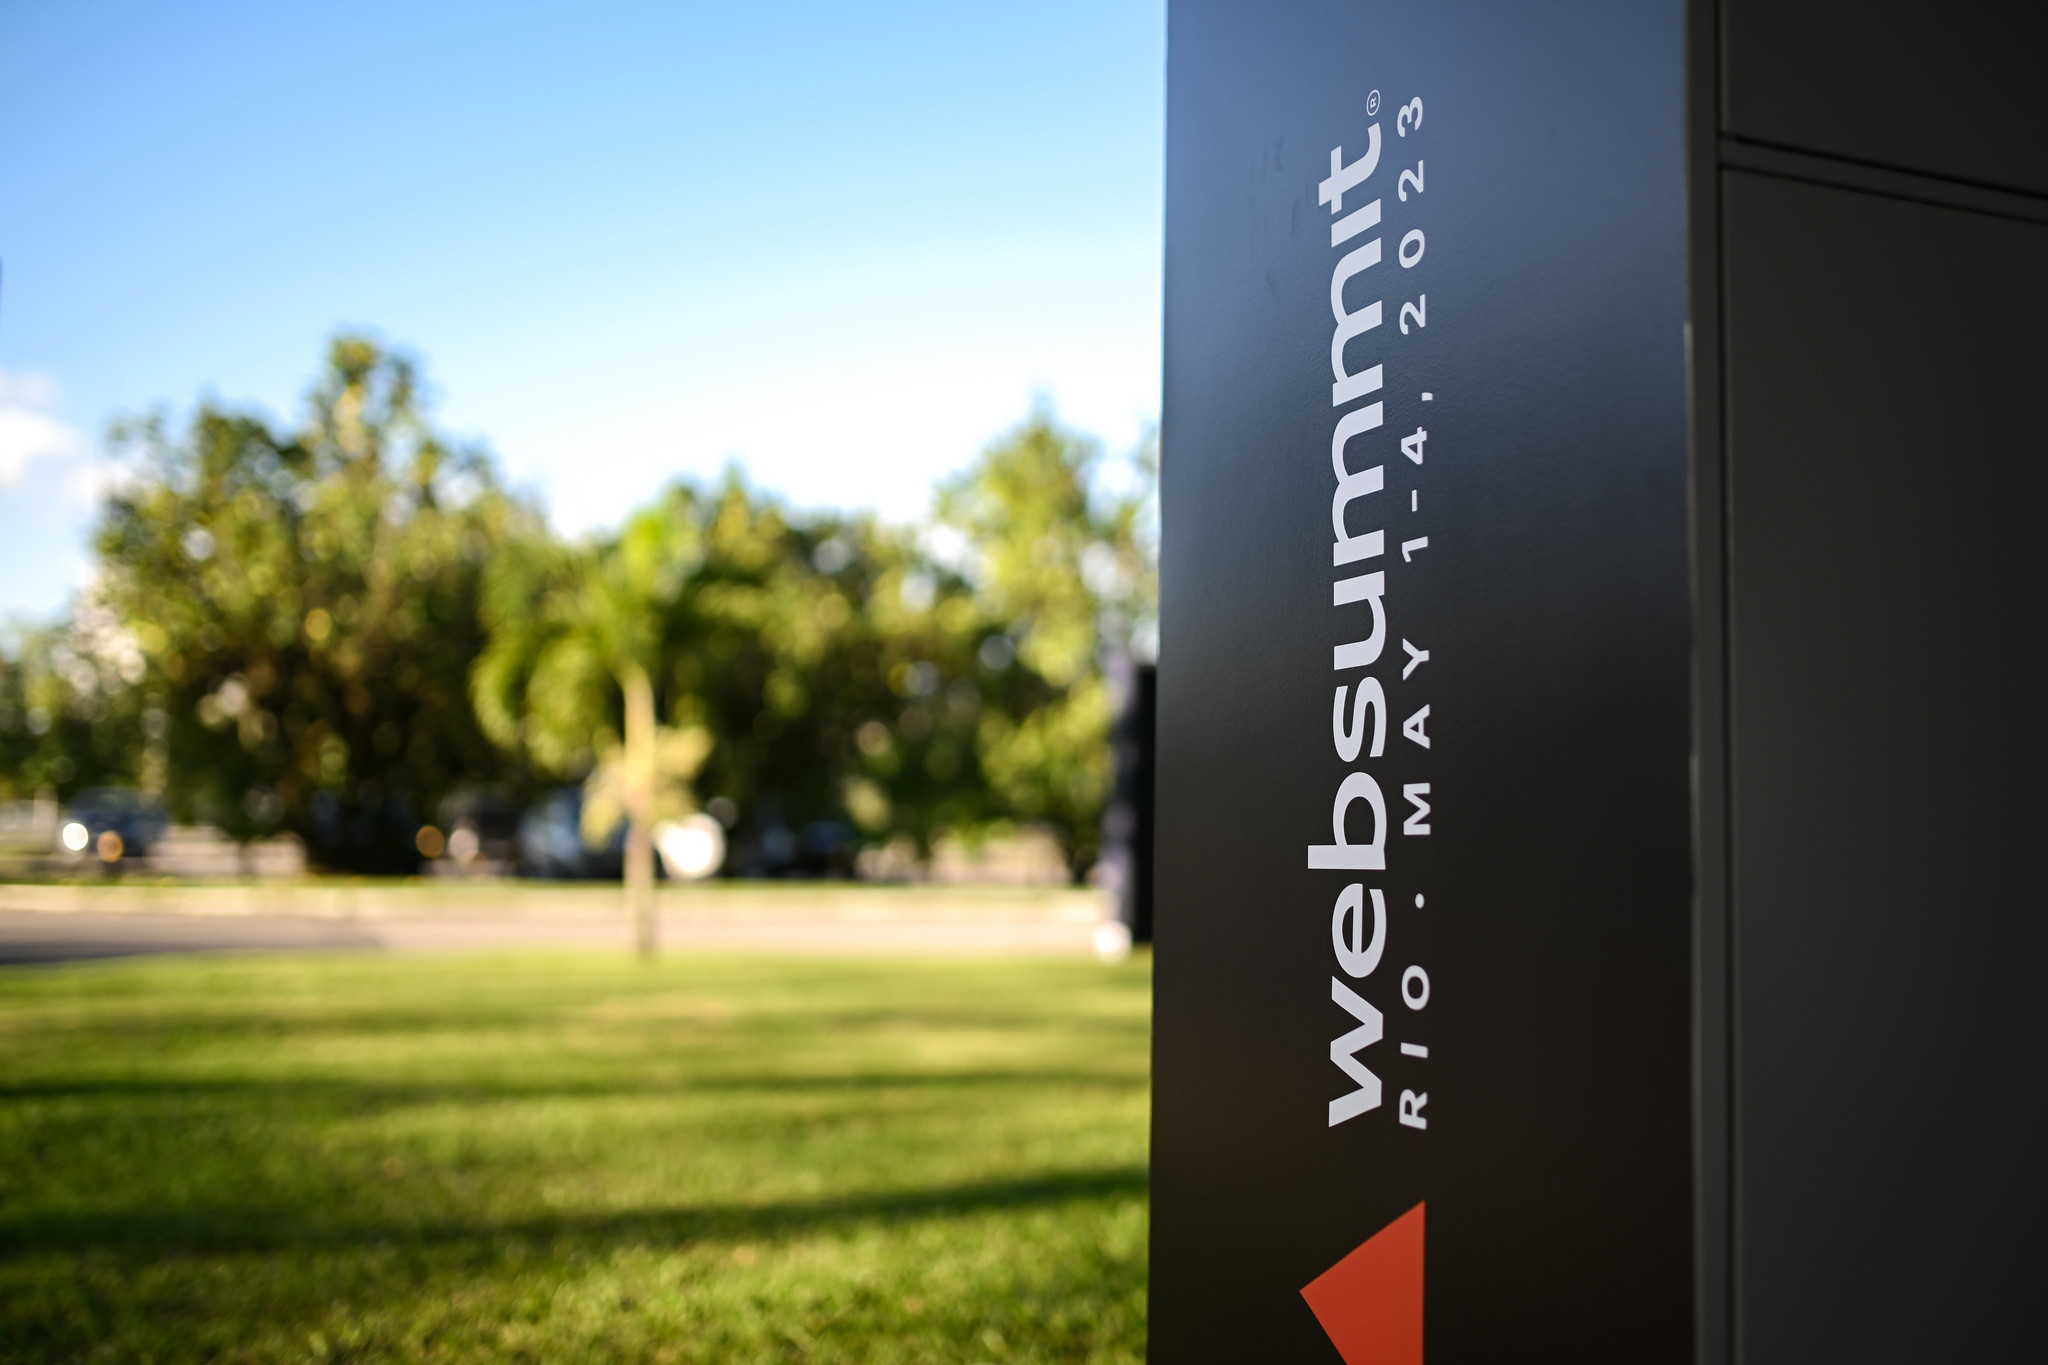 Photograph of Web Summit branding on a black object outside. To the left, there are blurred trees and a green area.